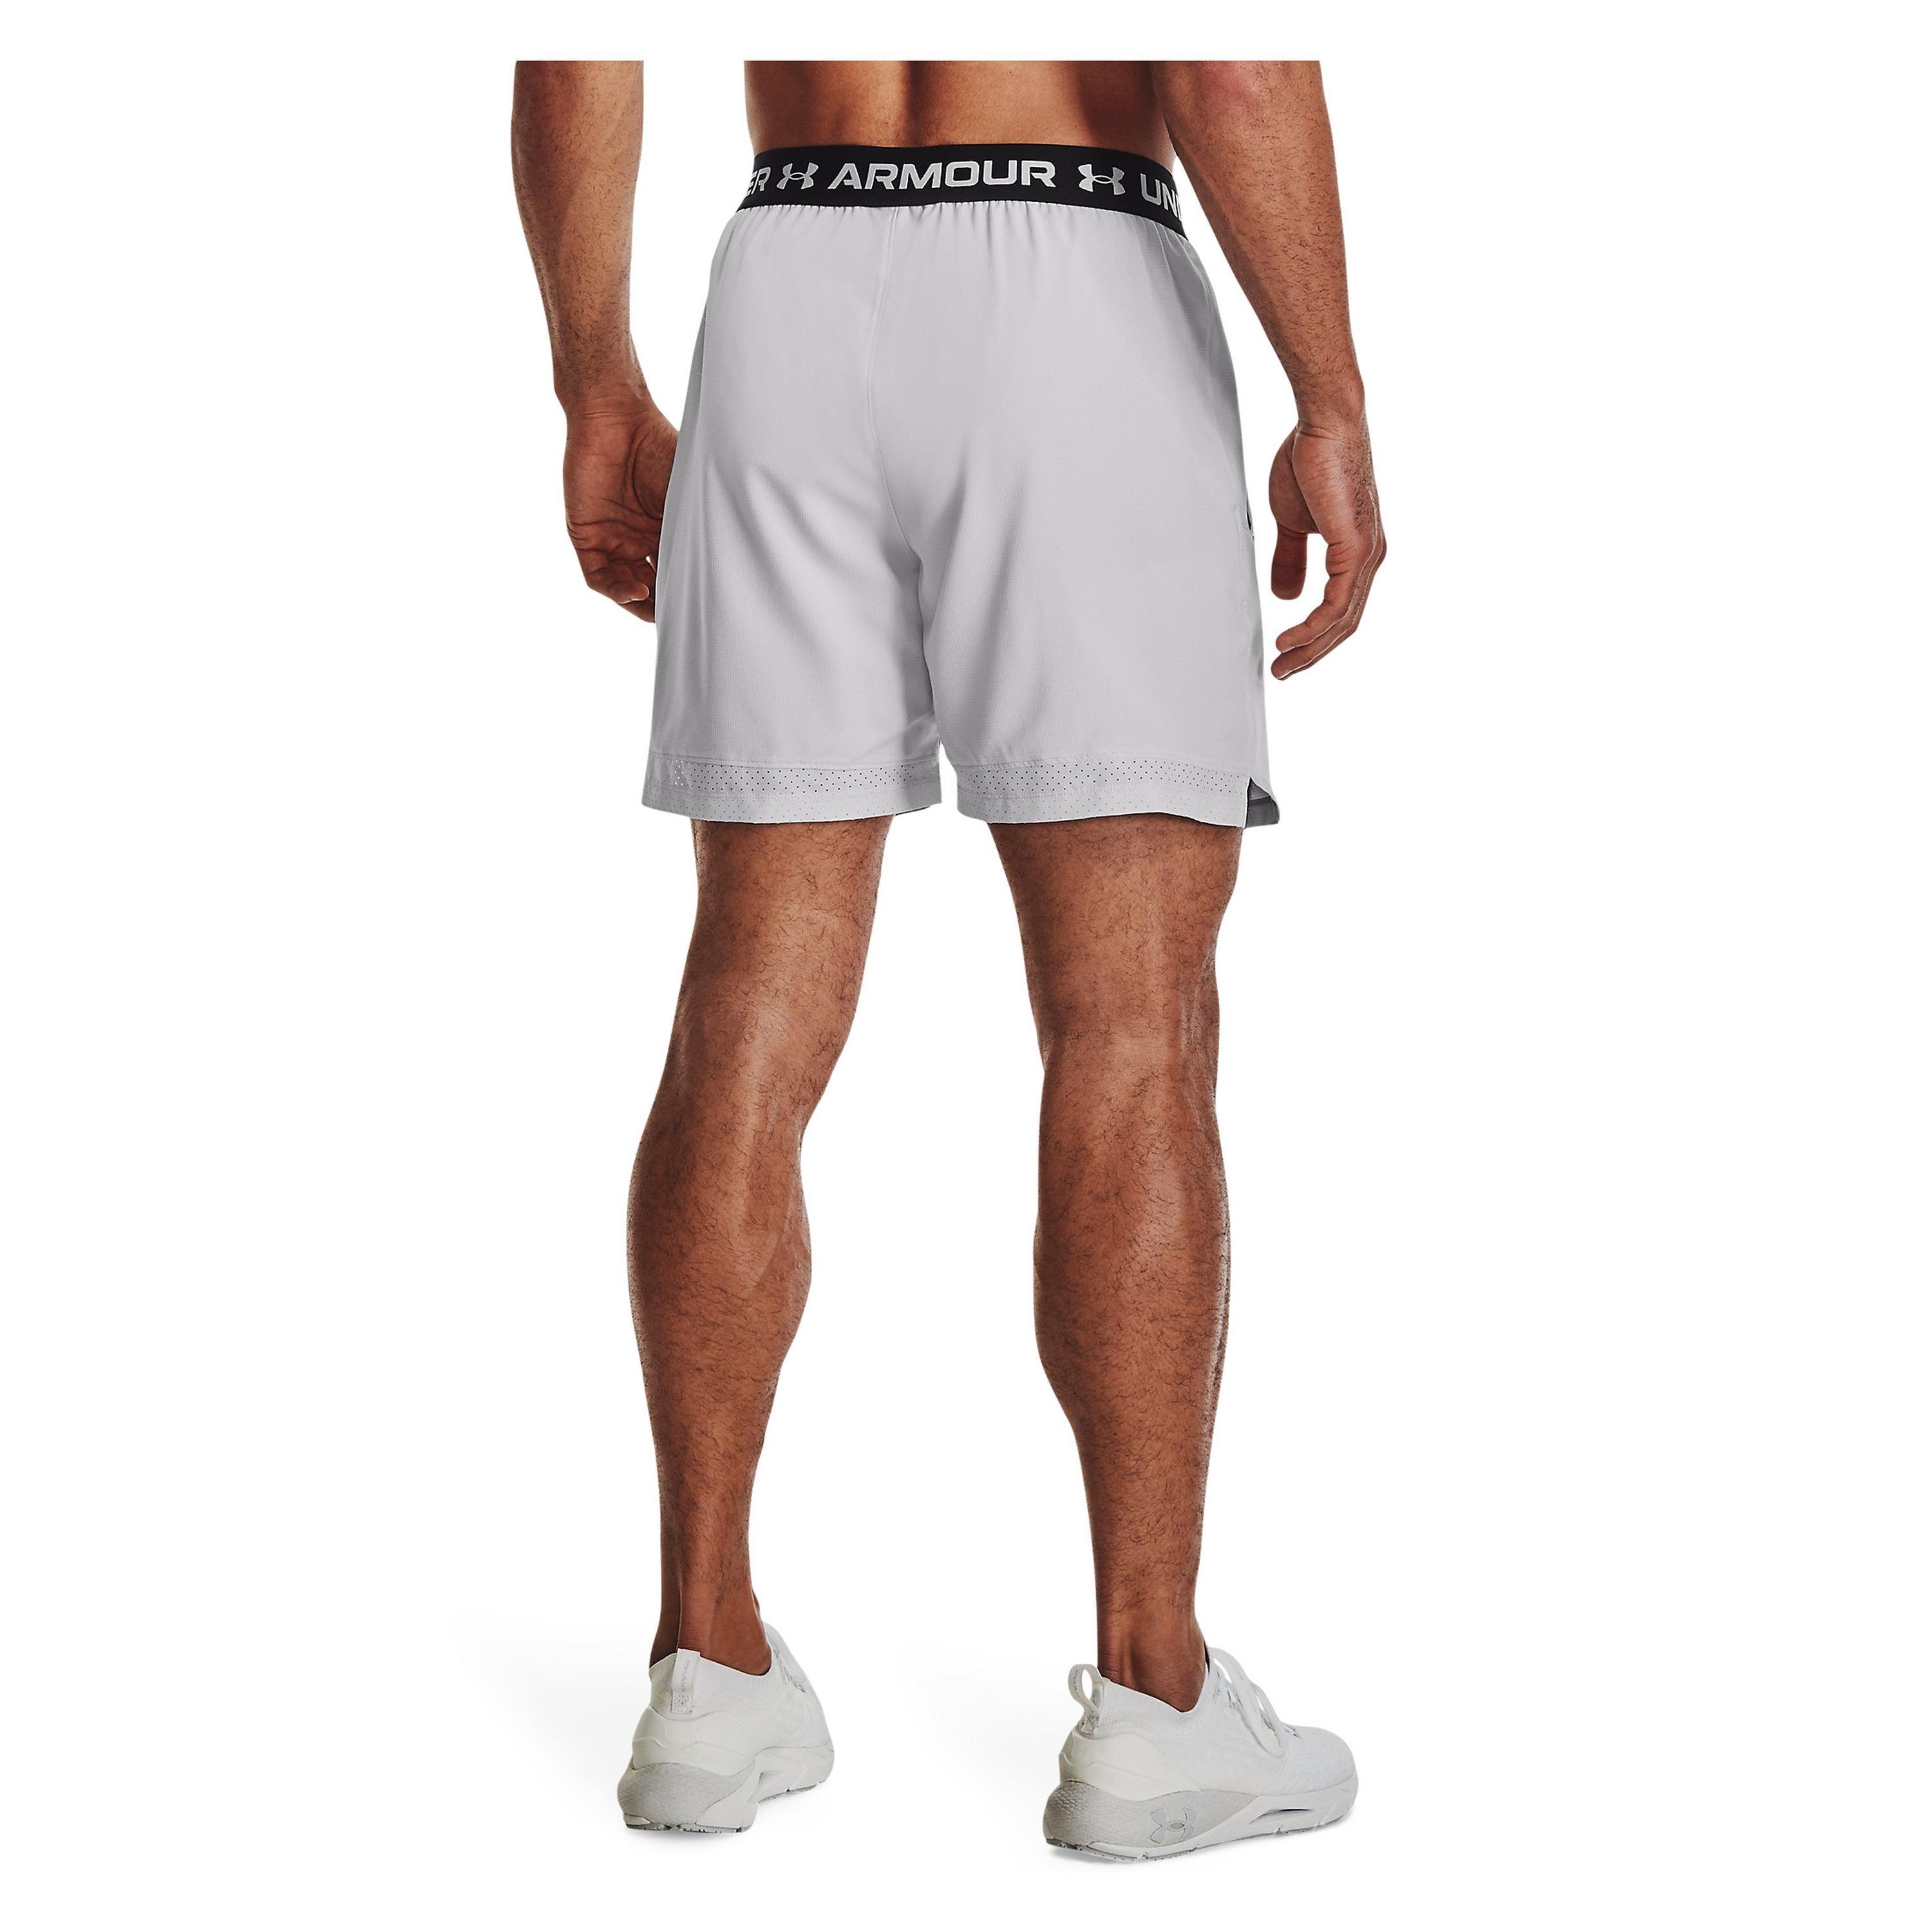 Halo Gray Funktionsshorts Woven Vanish 014 Under Armour®